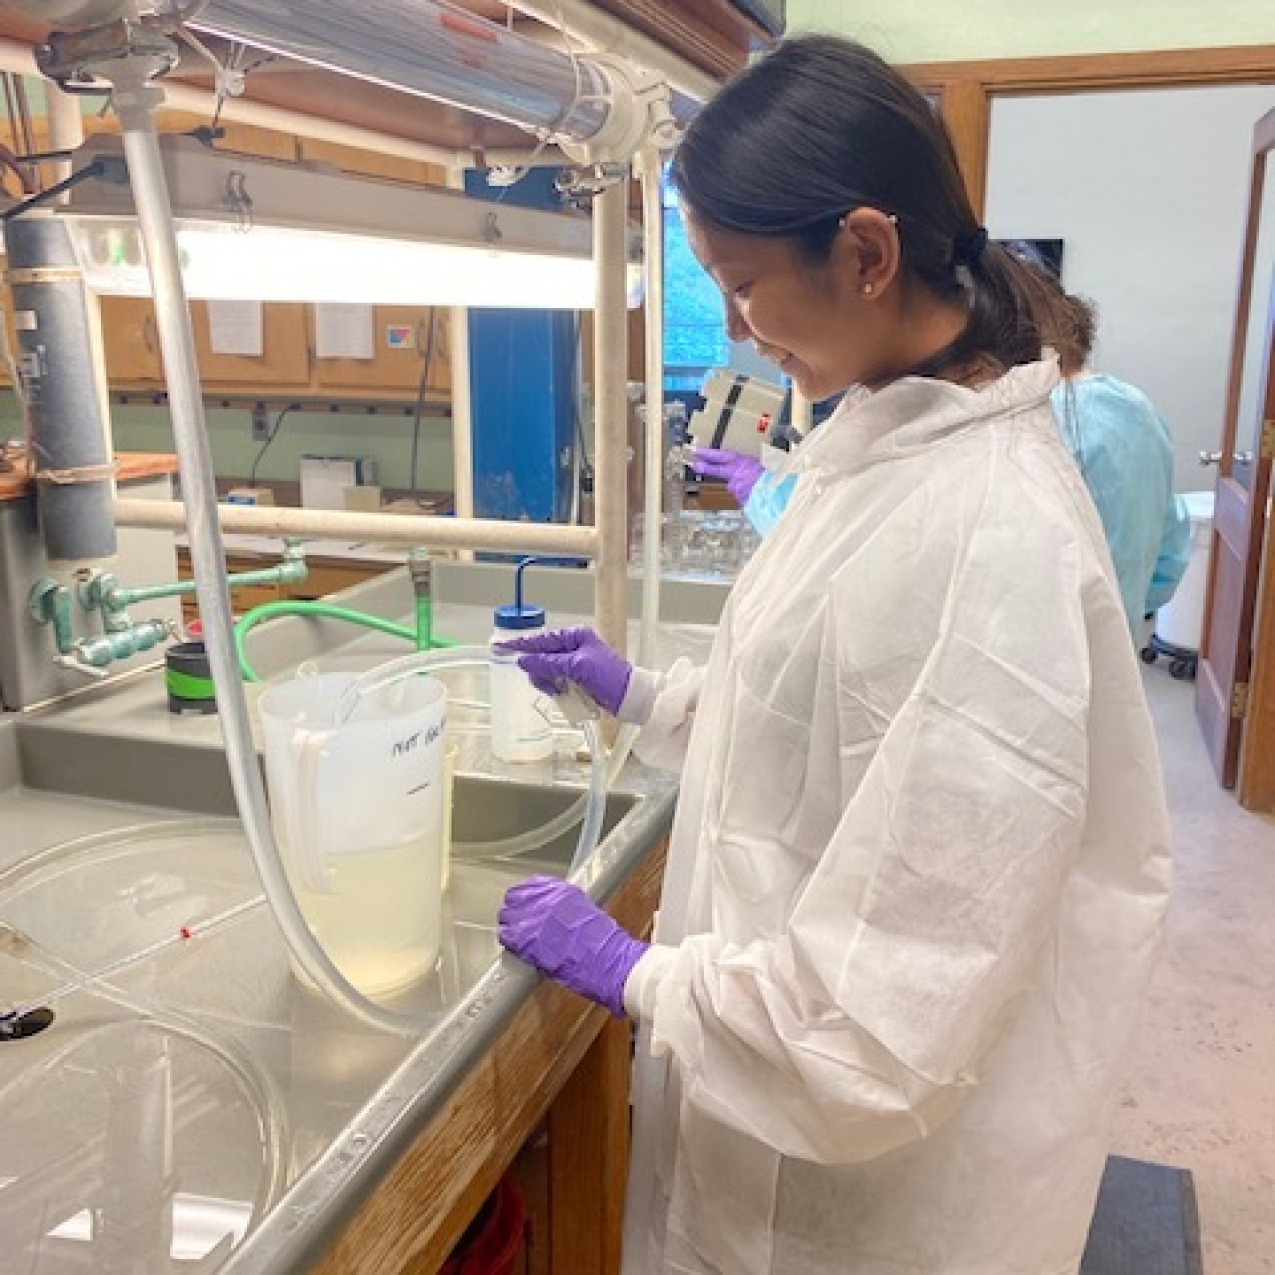 Rose wears a white lab coat and rubber gloves and is in what looks like a chemistry lab. She is pouring liquid into a pitcher through a tube.